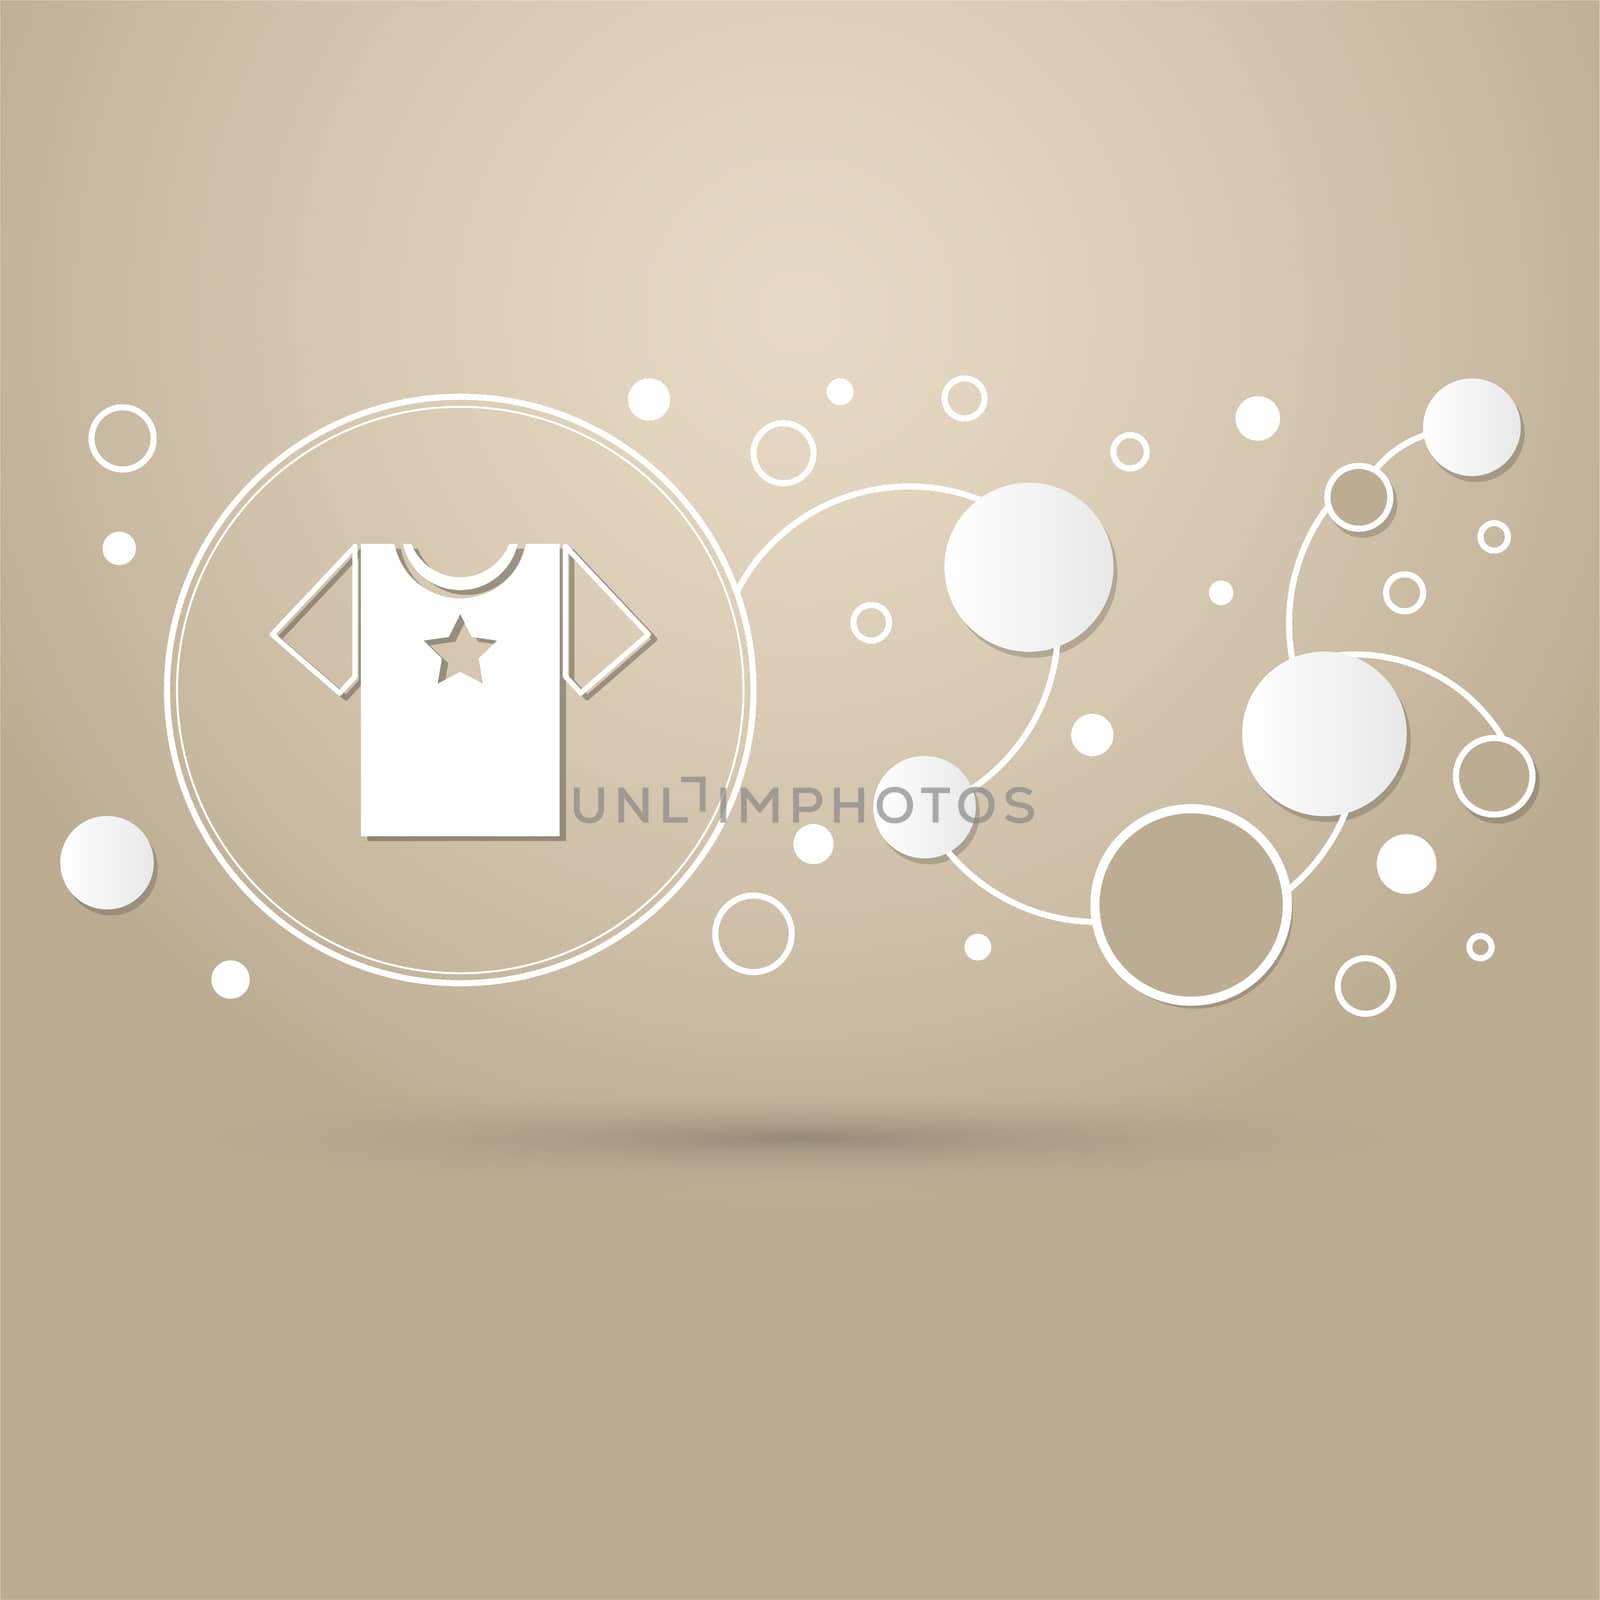 t-shirt icon on a brown background with elegant style and modern design infographic. illustration